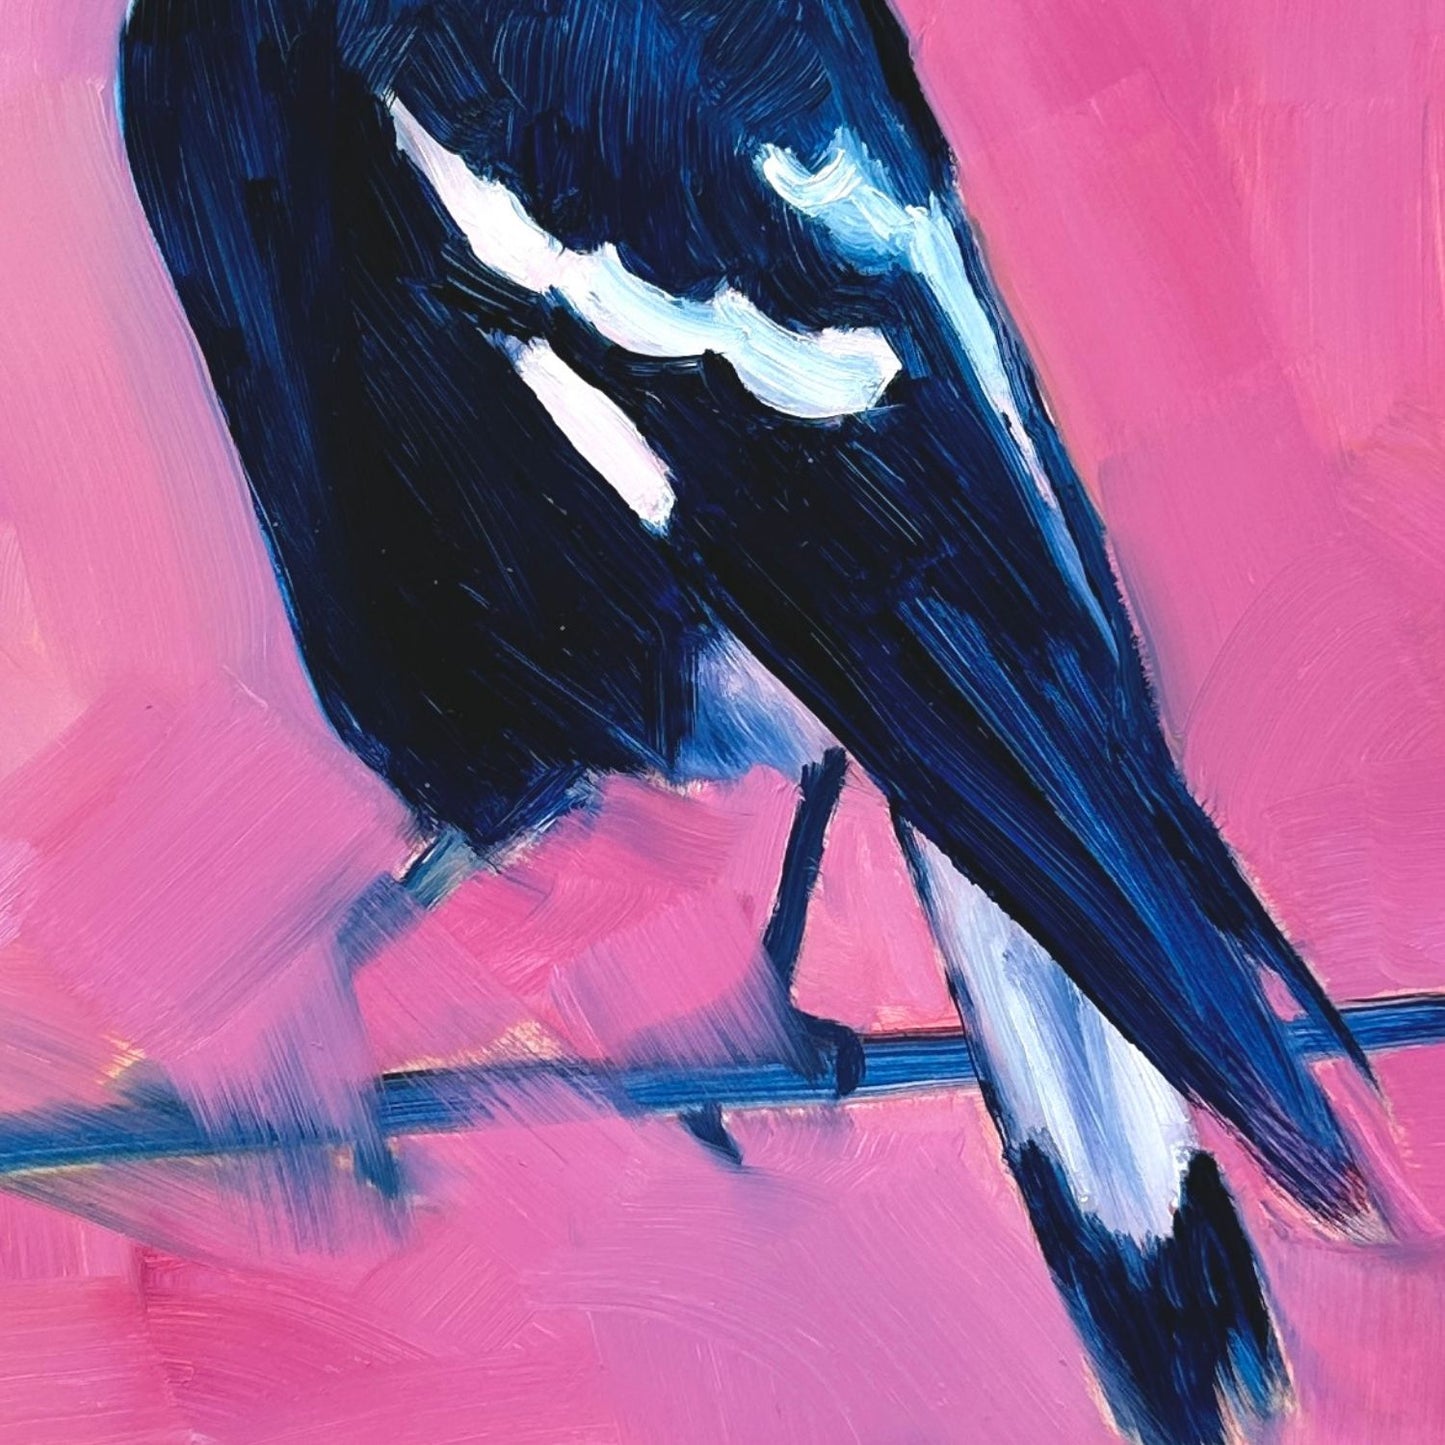 closeup of an original oil painting of a navy blue and white magpie on a textured bright pink background